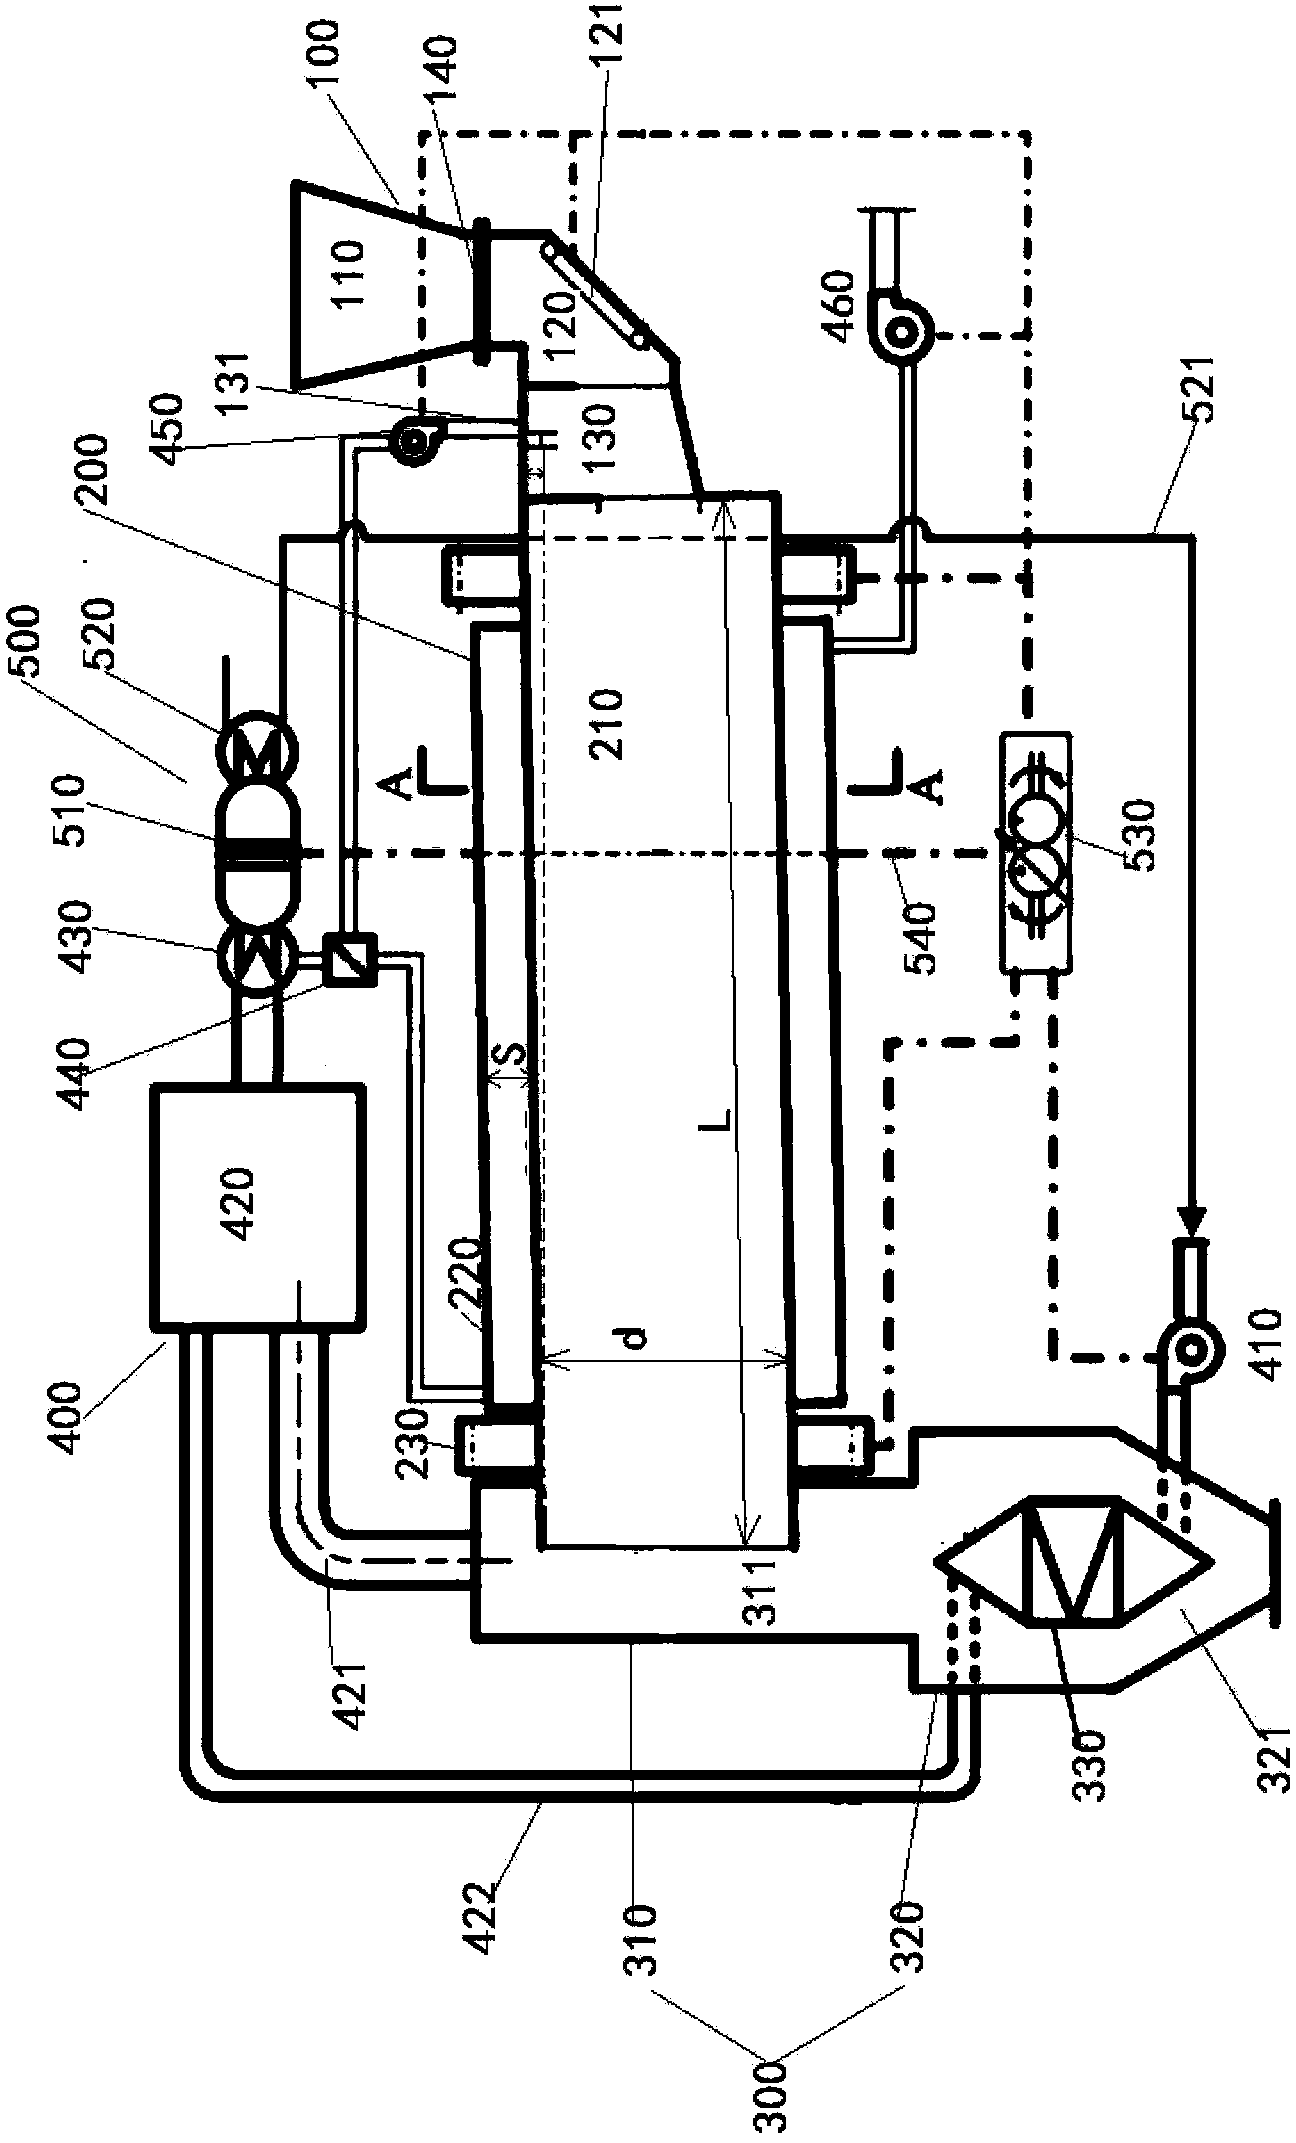 Biomass pyrolysis system and method through self-sufficient energy